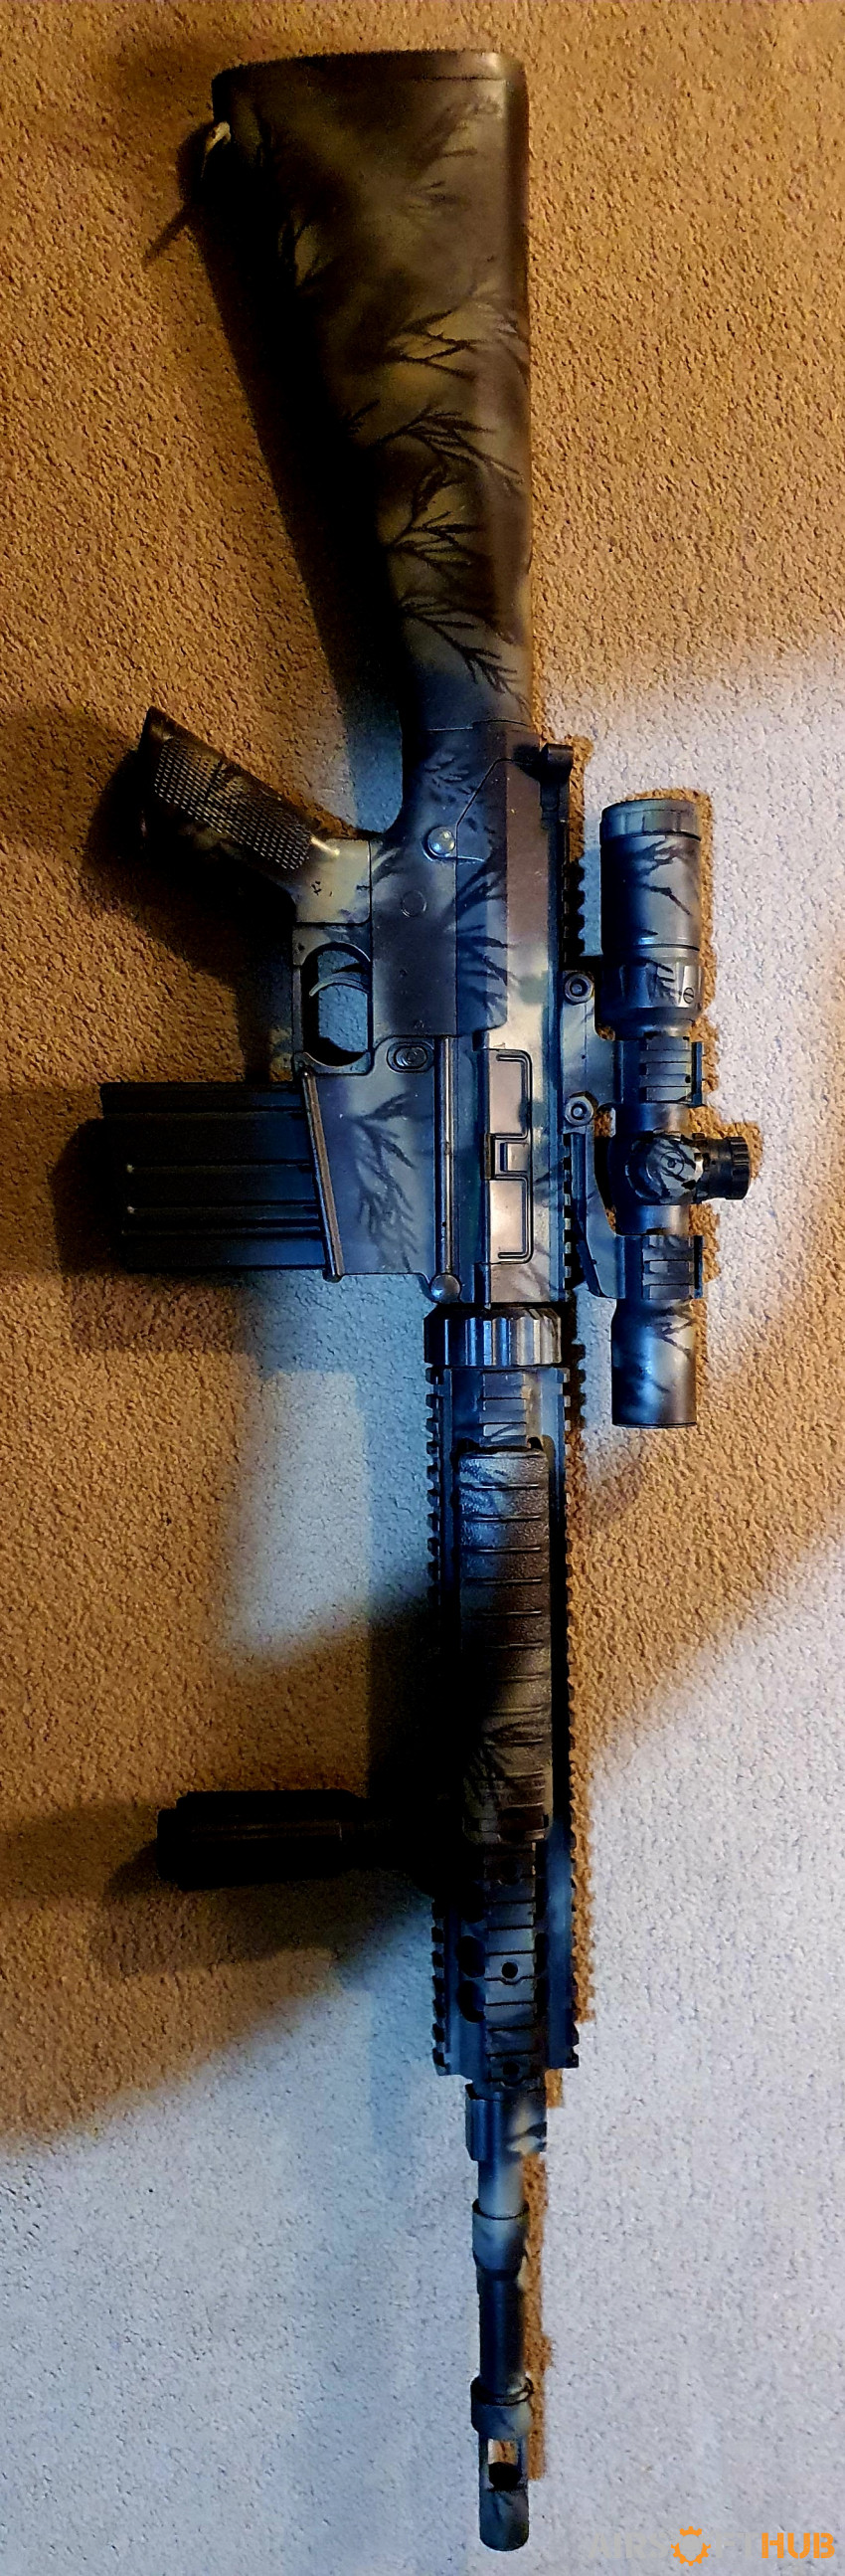 GR25 DMR - Used airsoft equipment